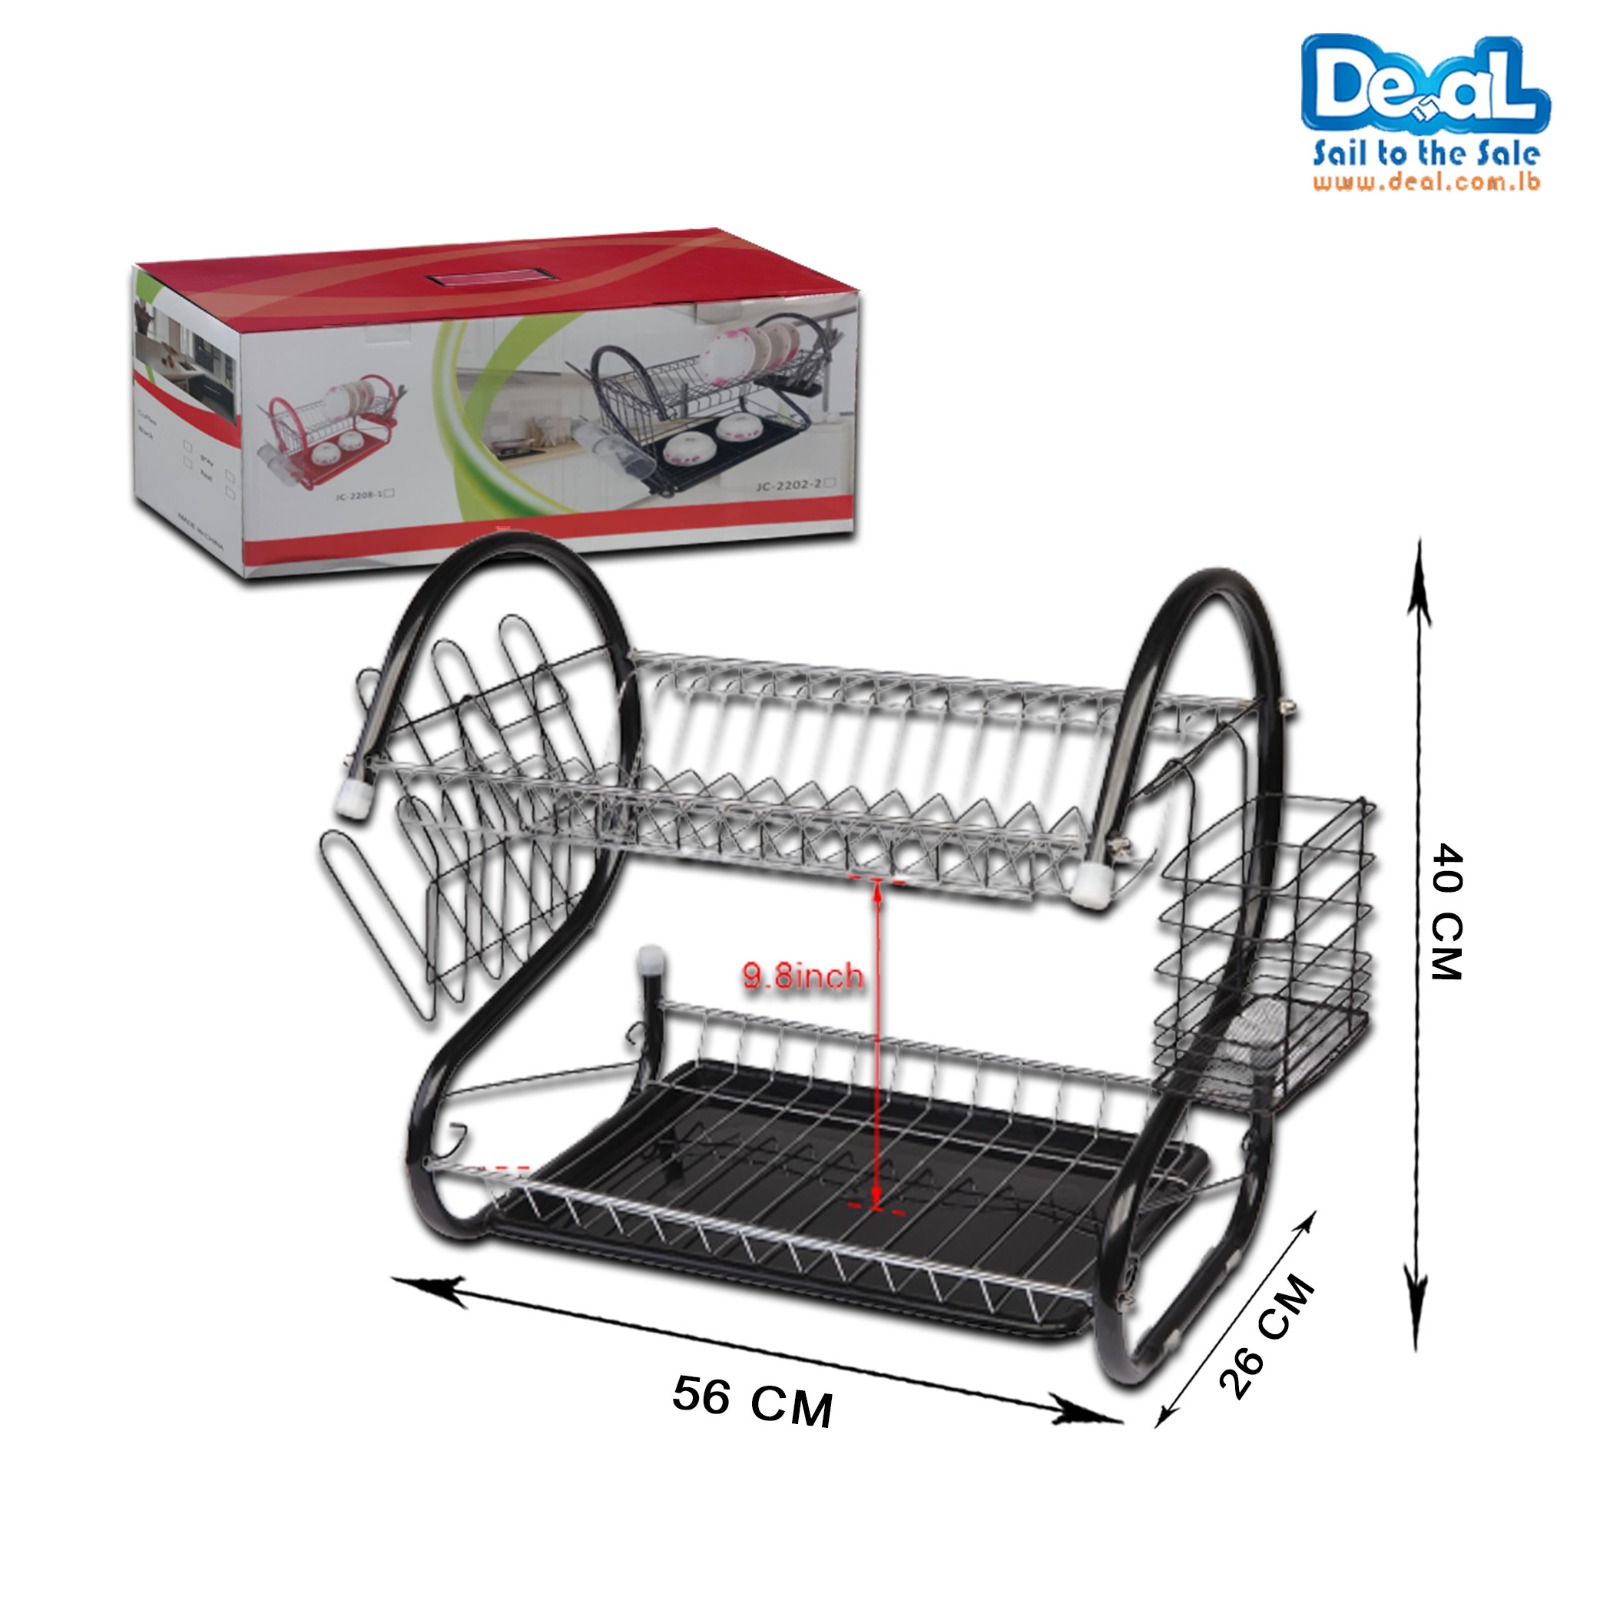 2+Tier+Dish+Drying+Rack+Granite+Engraving+Stainless+Steel+with+Drain+Board+size+56%2A26%2A40cm